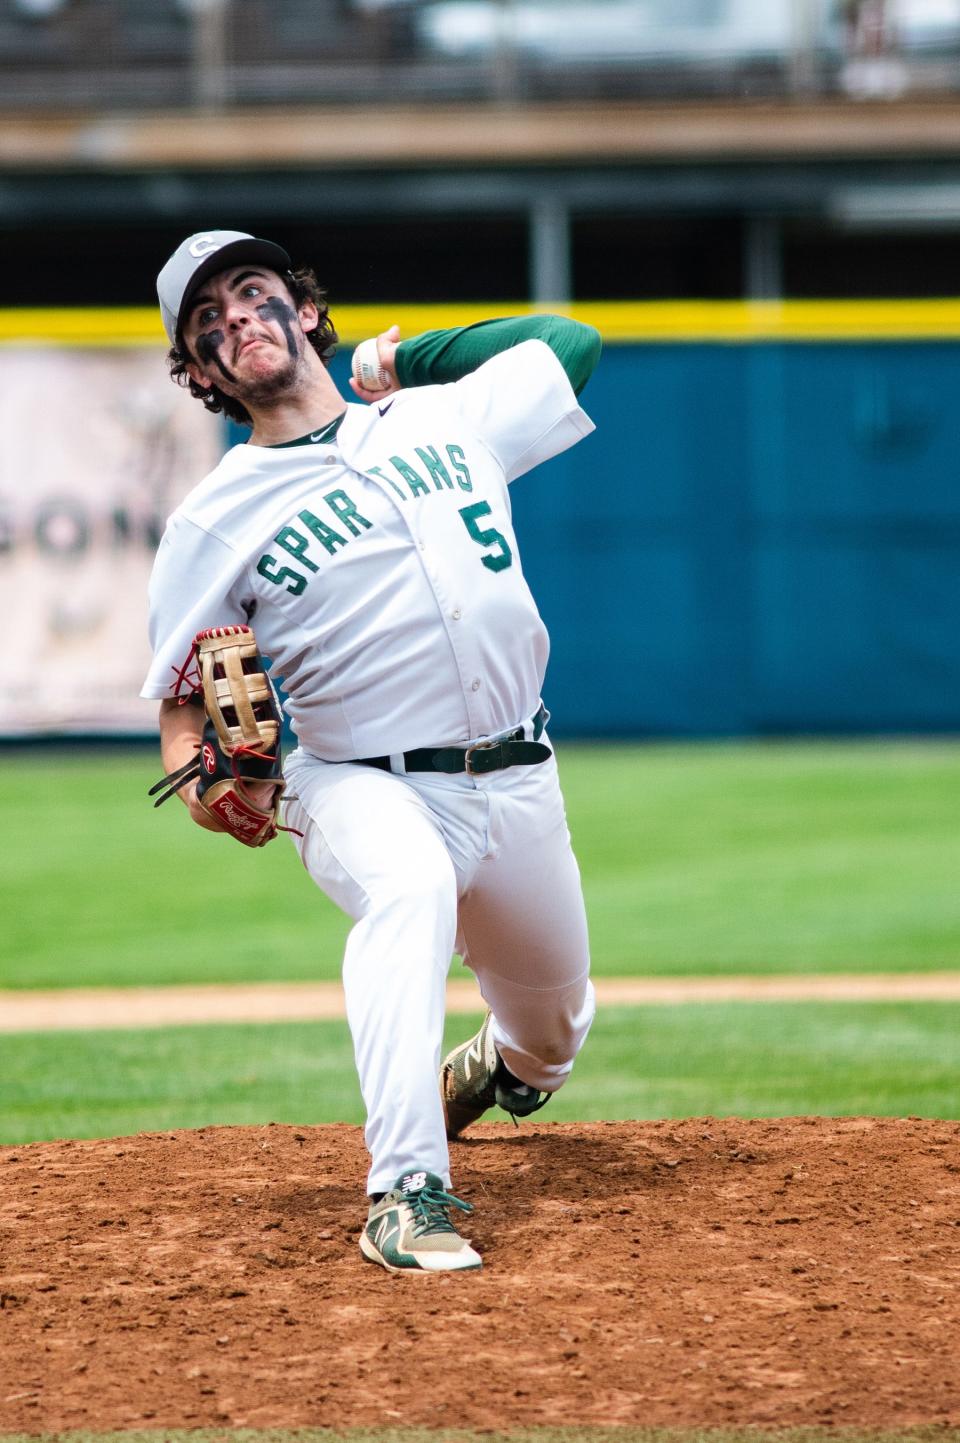 Spackenkill's Andrew Speranza pitches during the Class B sub regional baseball game at Cantine Field in Saugerties, NY on Thursday, June 2, 2022. Spackenkill defeated Rye Neck 8-5.